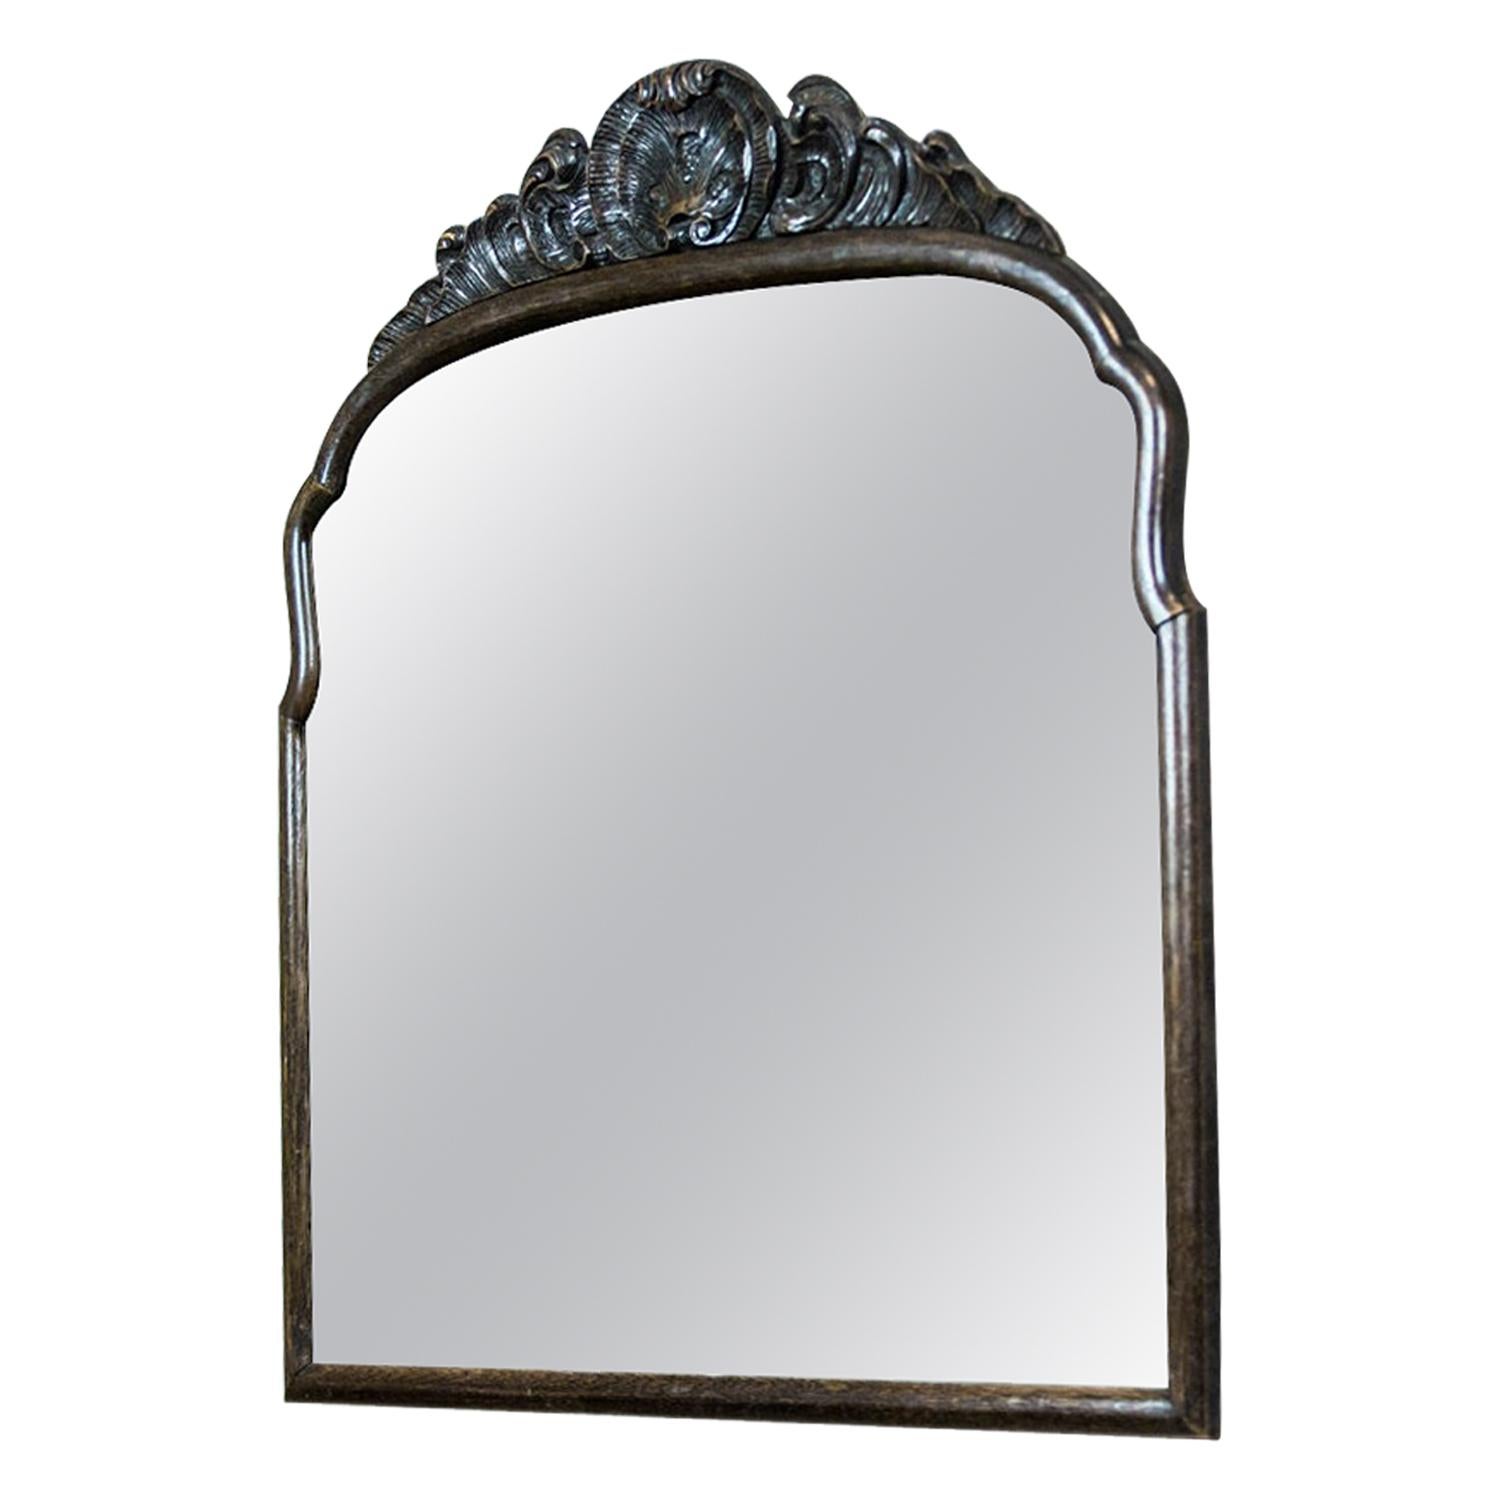 19th-Century Neo-Rococo Mirror in a Wooden Frame